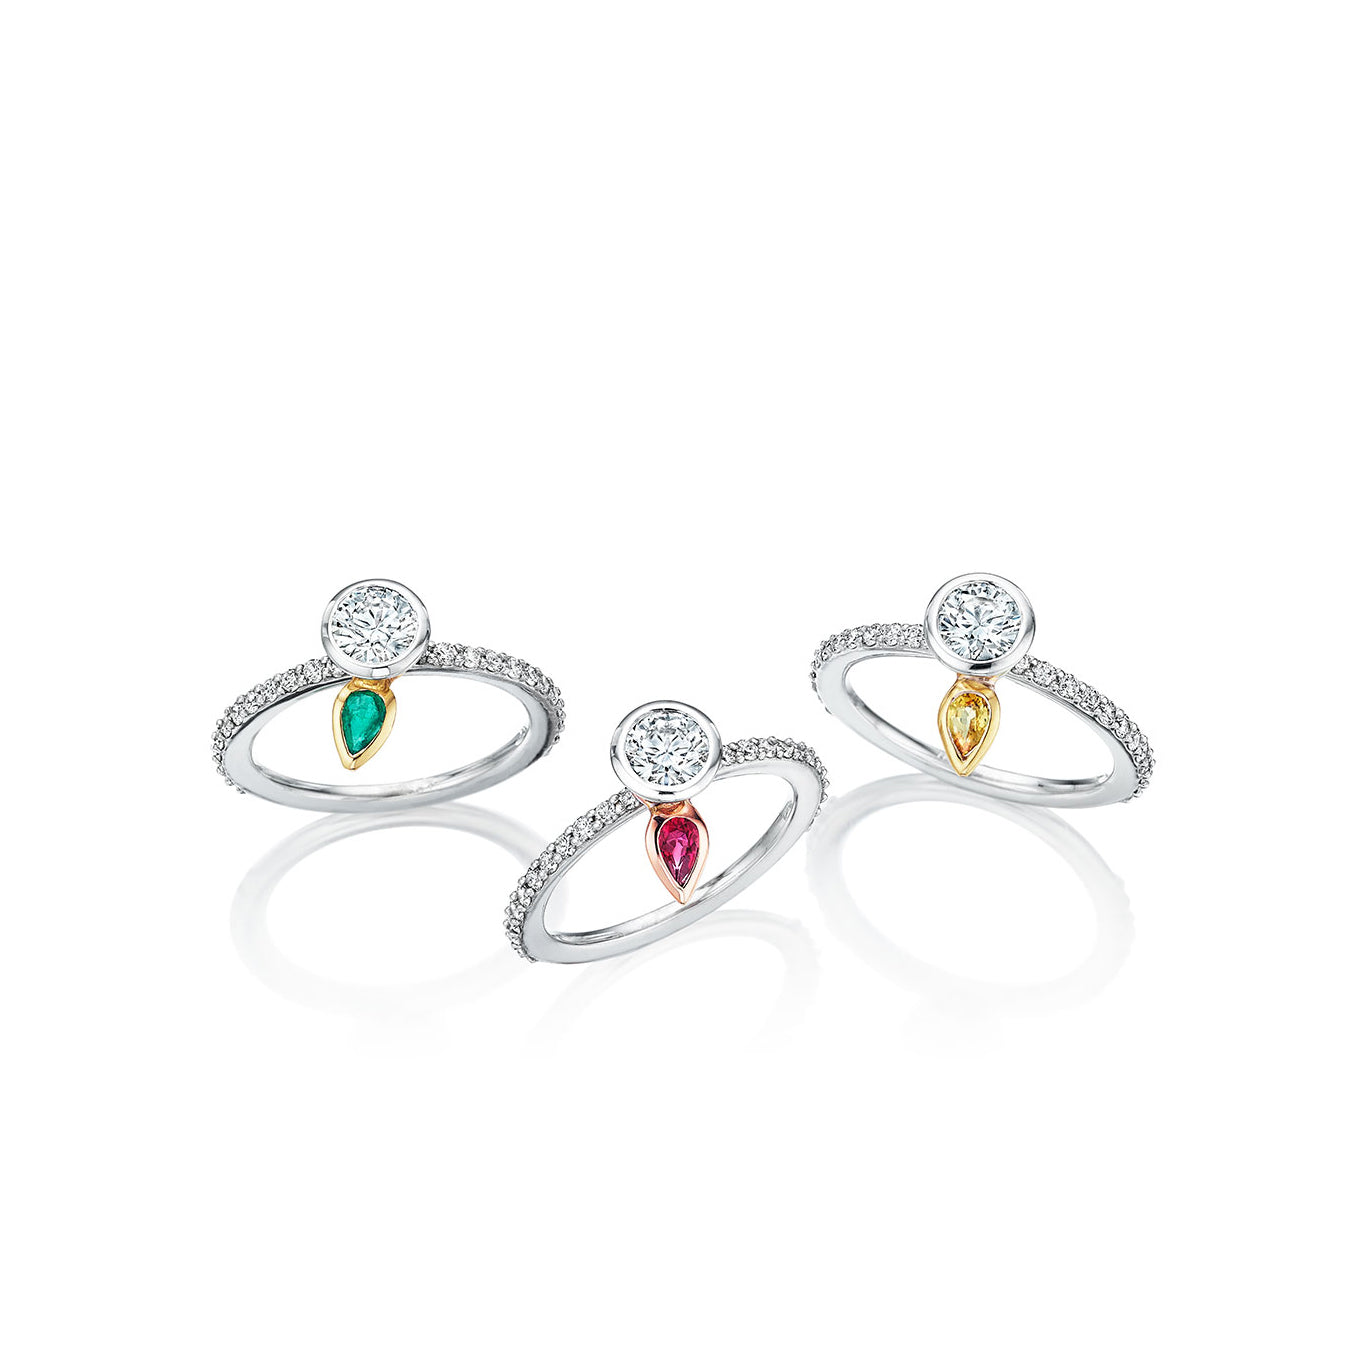 Beautiful ring collection featuring pear shape colored stone to represent each child’s birth stone from Chicago jewelry designer, Lester Lampert.